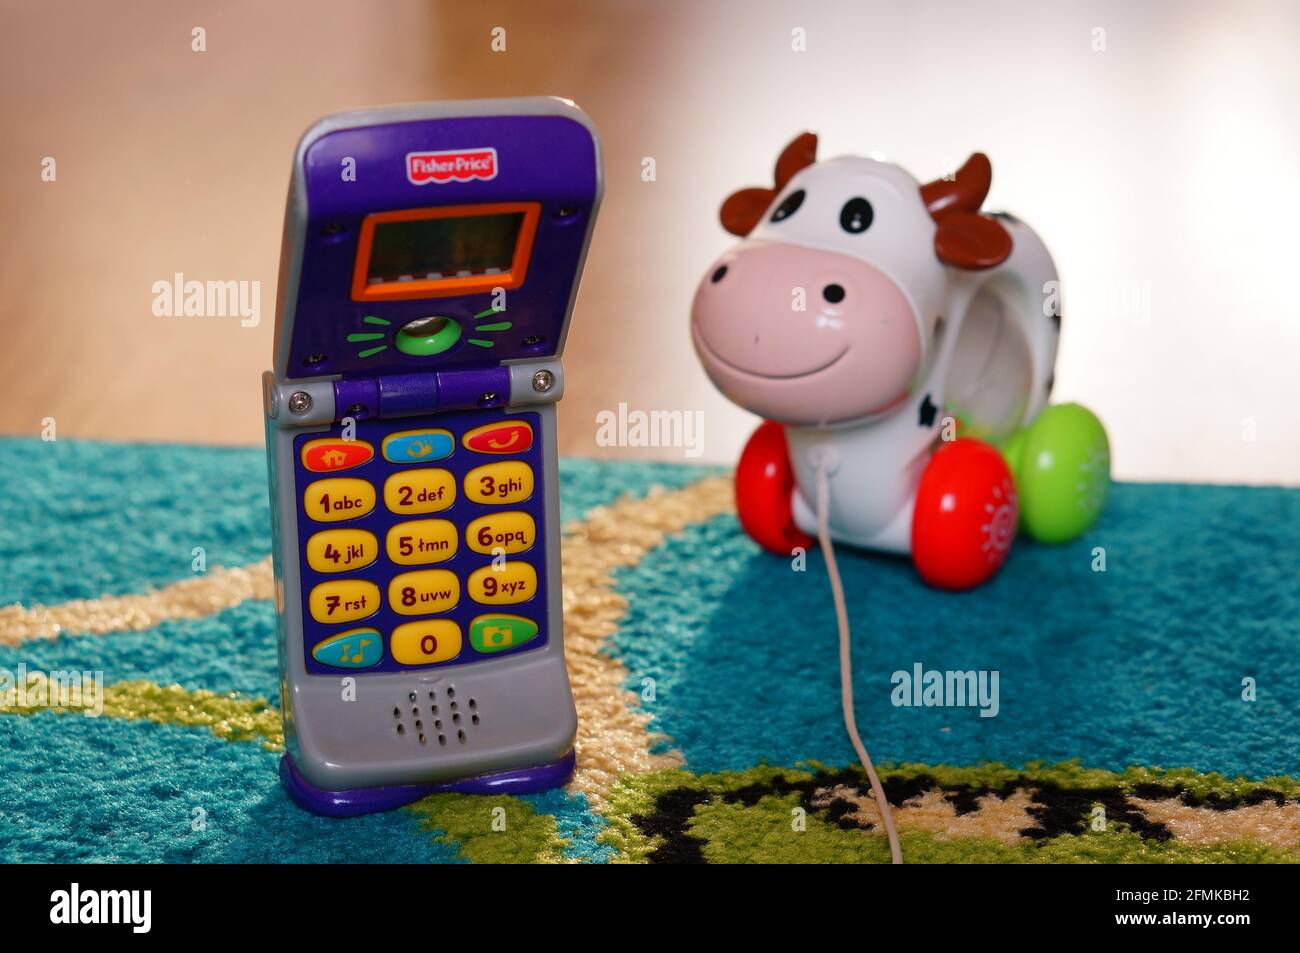 POZNAN, POLAND - Aug 20, 2015: Fisher Price plastic toy phone and toy cow in background Stock Photo